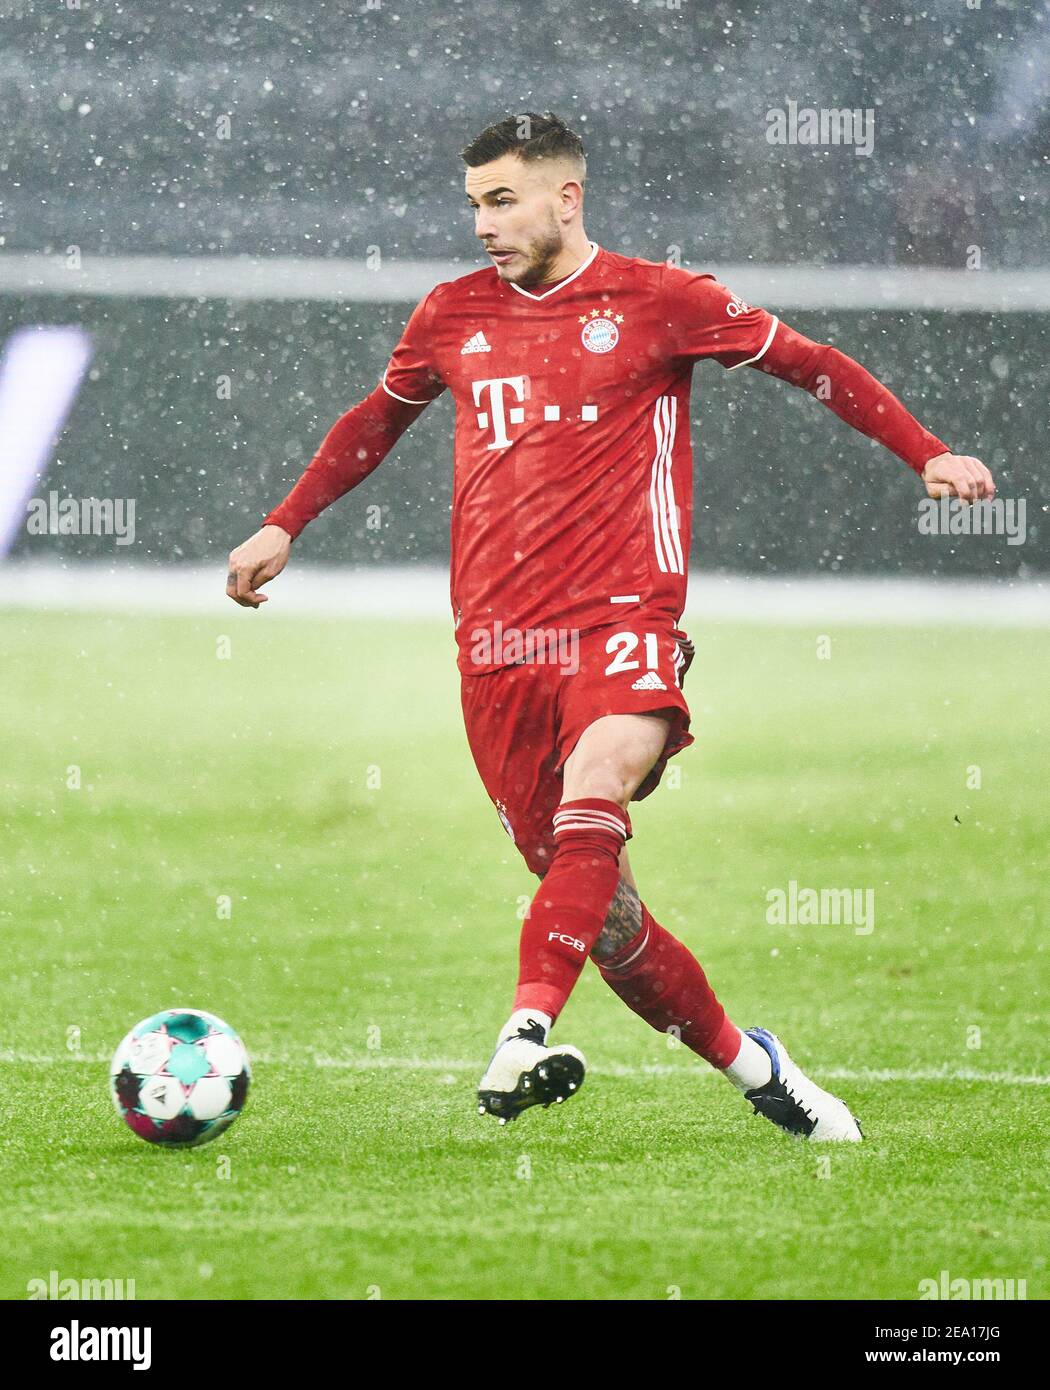 Berlin, Germany. 05th Feb, 2021. Lucas HERNANDEZ (FCB 21)  in the match HERTHA BSC BERLIN - FC BAYERN MUENCHEN 0-1 1.German Football League on February 5, 2021 in Berlin, Germany  Season 2020/2021, matchday 20, 1.Bundesliga, FCB, München, 20.Spieltag © Peter Schatz / Alamy Live News    - DFL REGULATIONS PROHIBIT ANY USE OF PHOTOGRAPHS as IMAGE SEQUENCES and/or QUASI-VIDEO - Credit: Peter Schatz/Alamy Live News Stock Photo